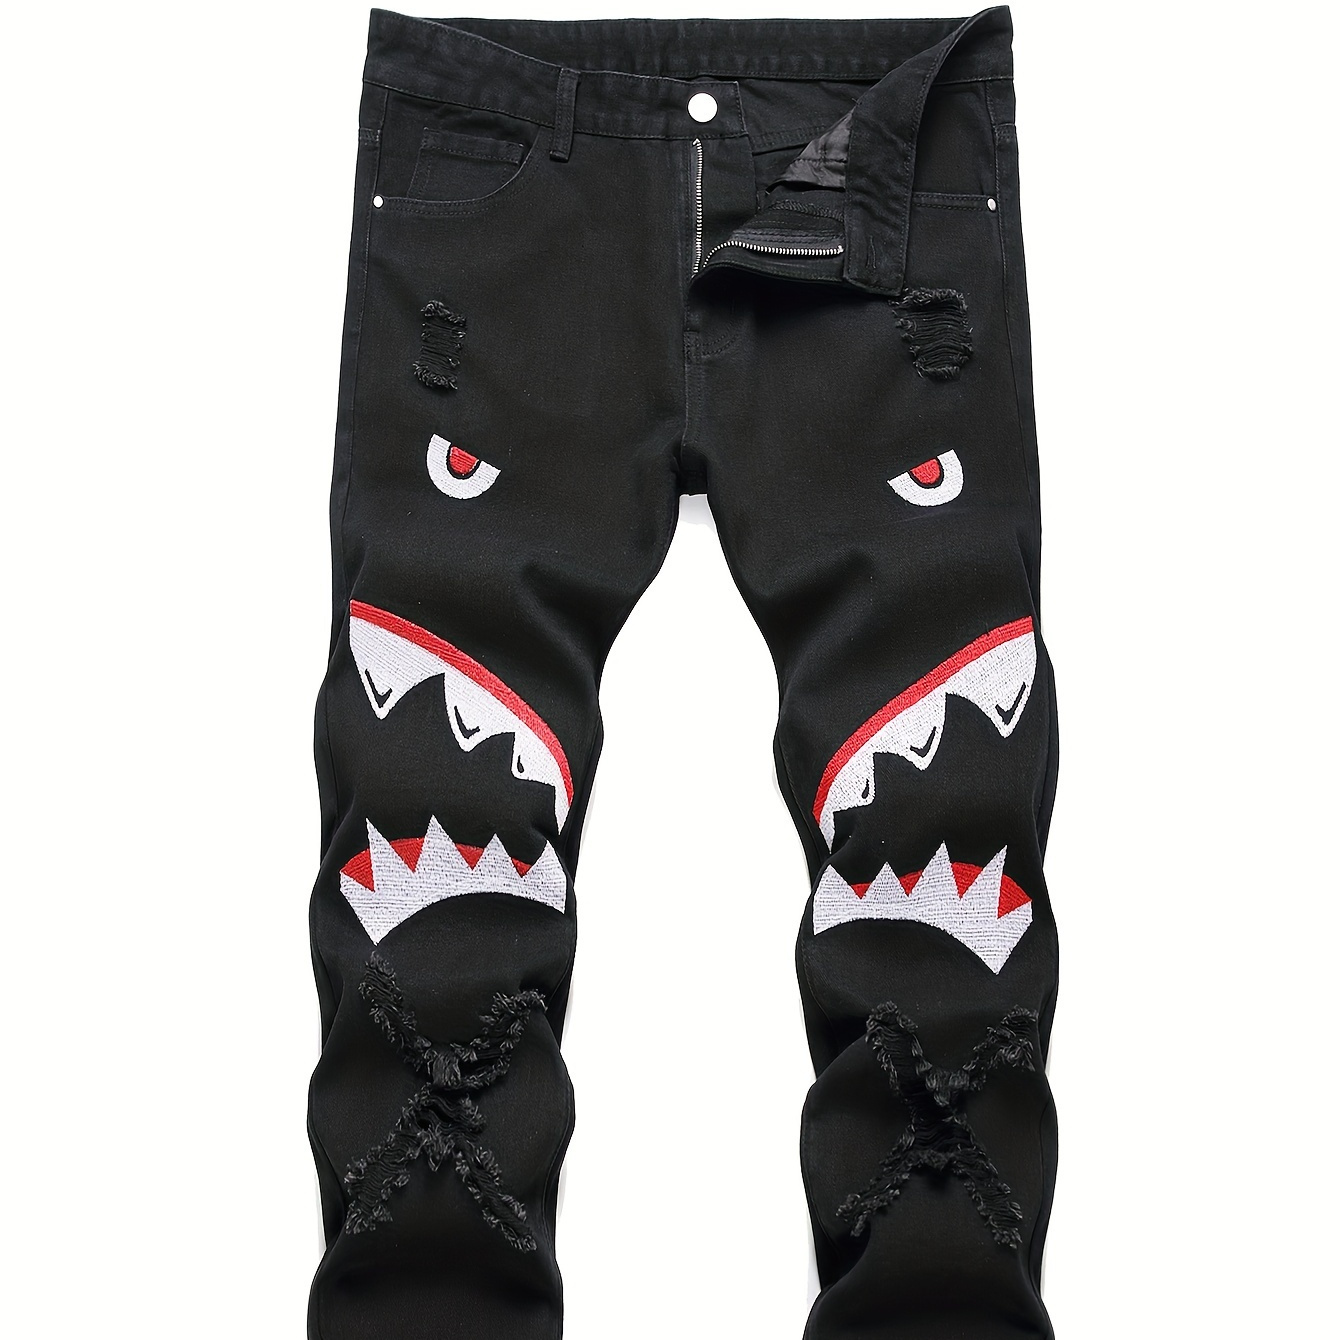 

Boys Distressed Ripped Skinny Jeans, Street Style Denim Pants With Shark Embroidery, Slim Fit For All Season